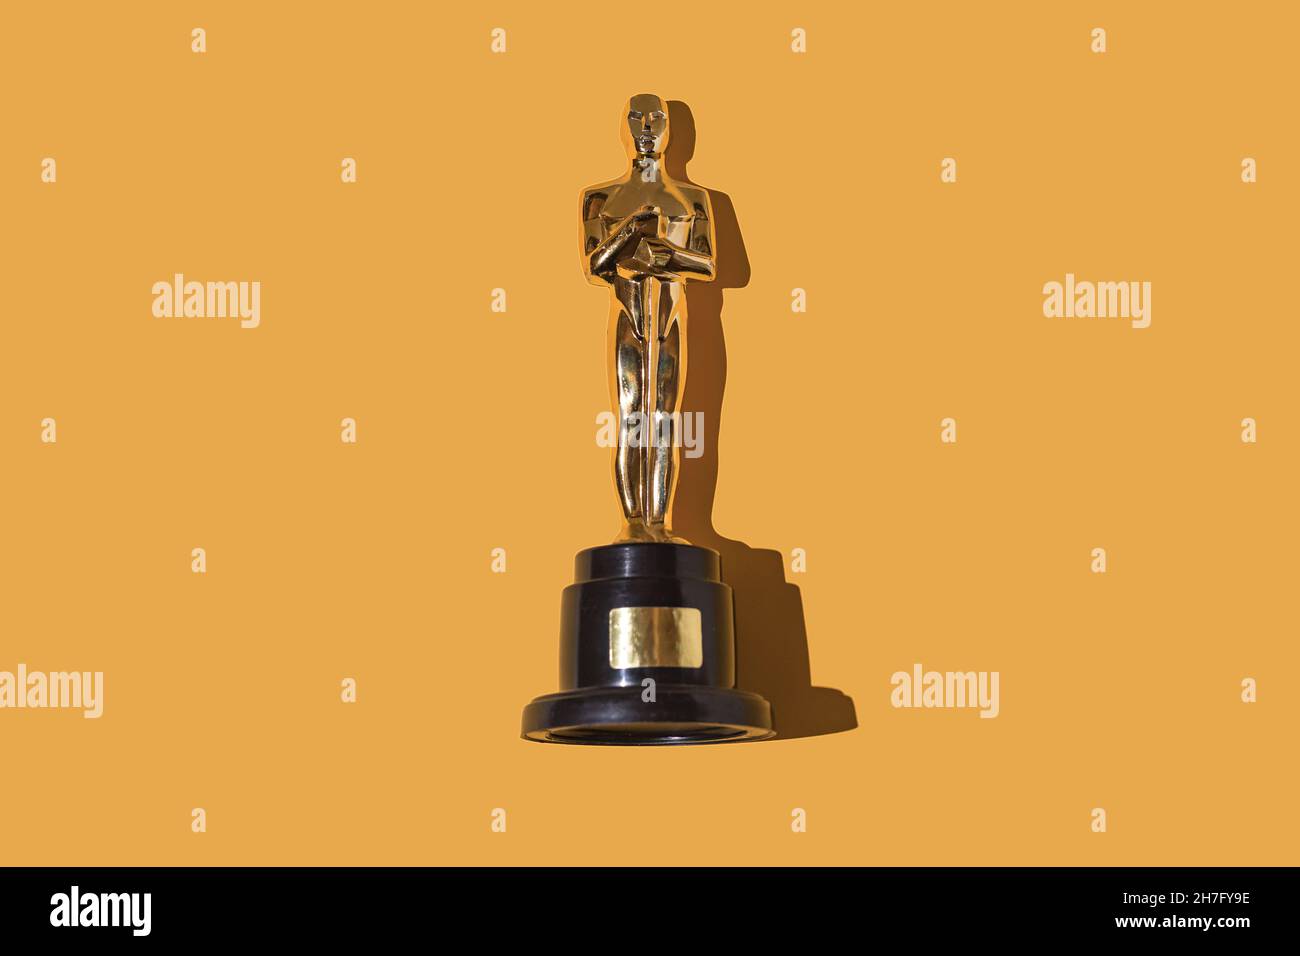 Oscar awards trophy on yellow background. Award, film industry, Hollywood and winner concept. Stock Photo